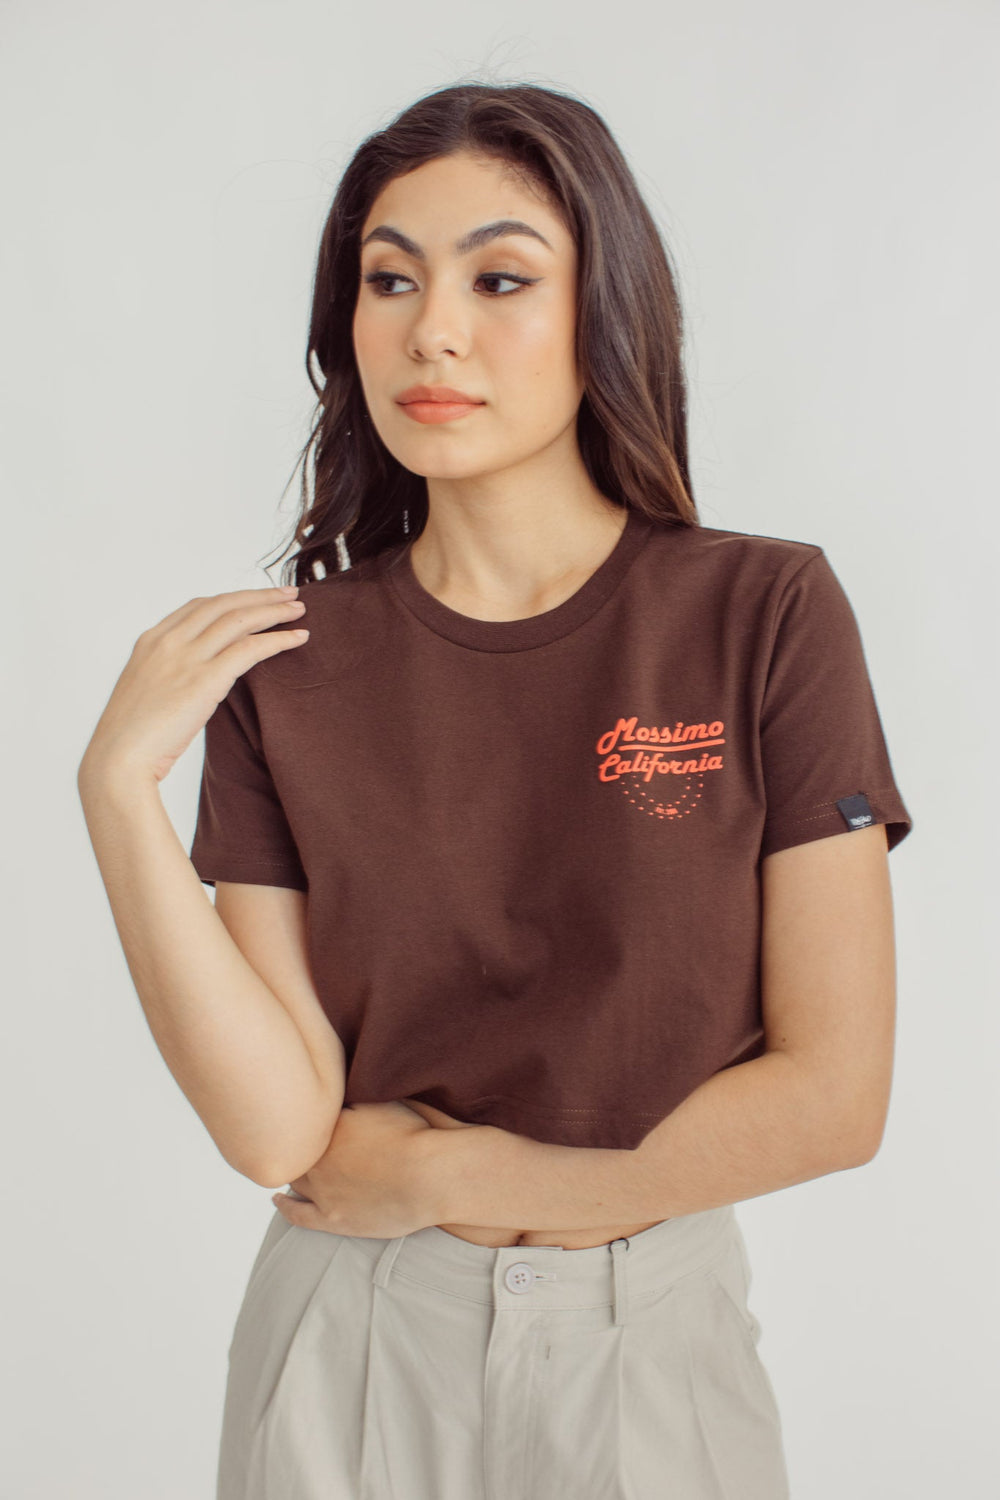 Choco Brown with Mossimo California Vintage Cropped Fit Tee - Mossimo PH